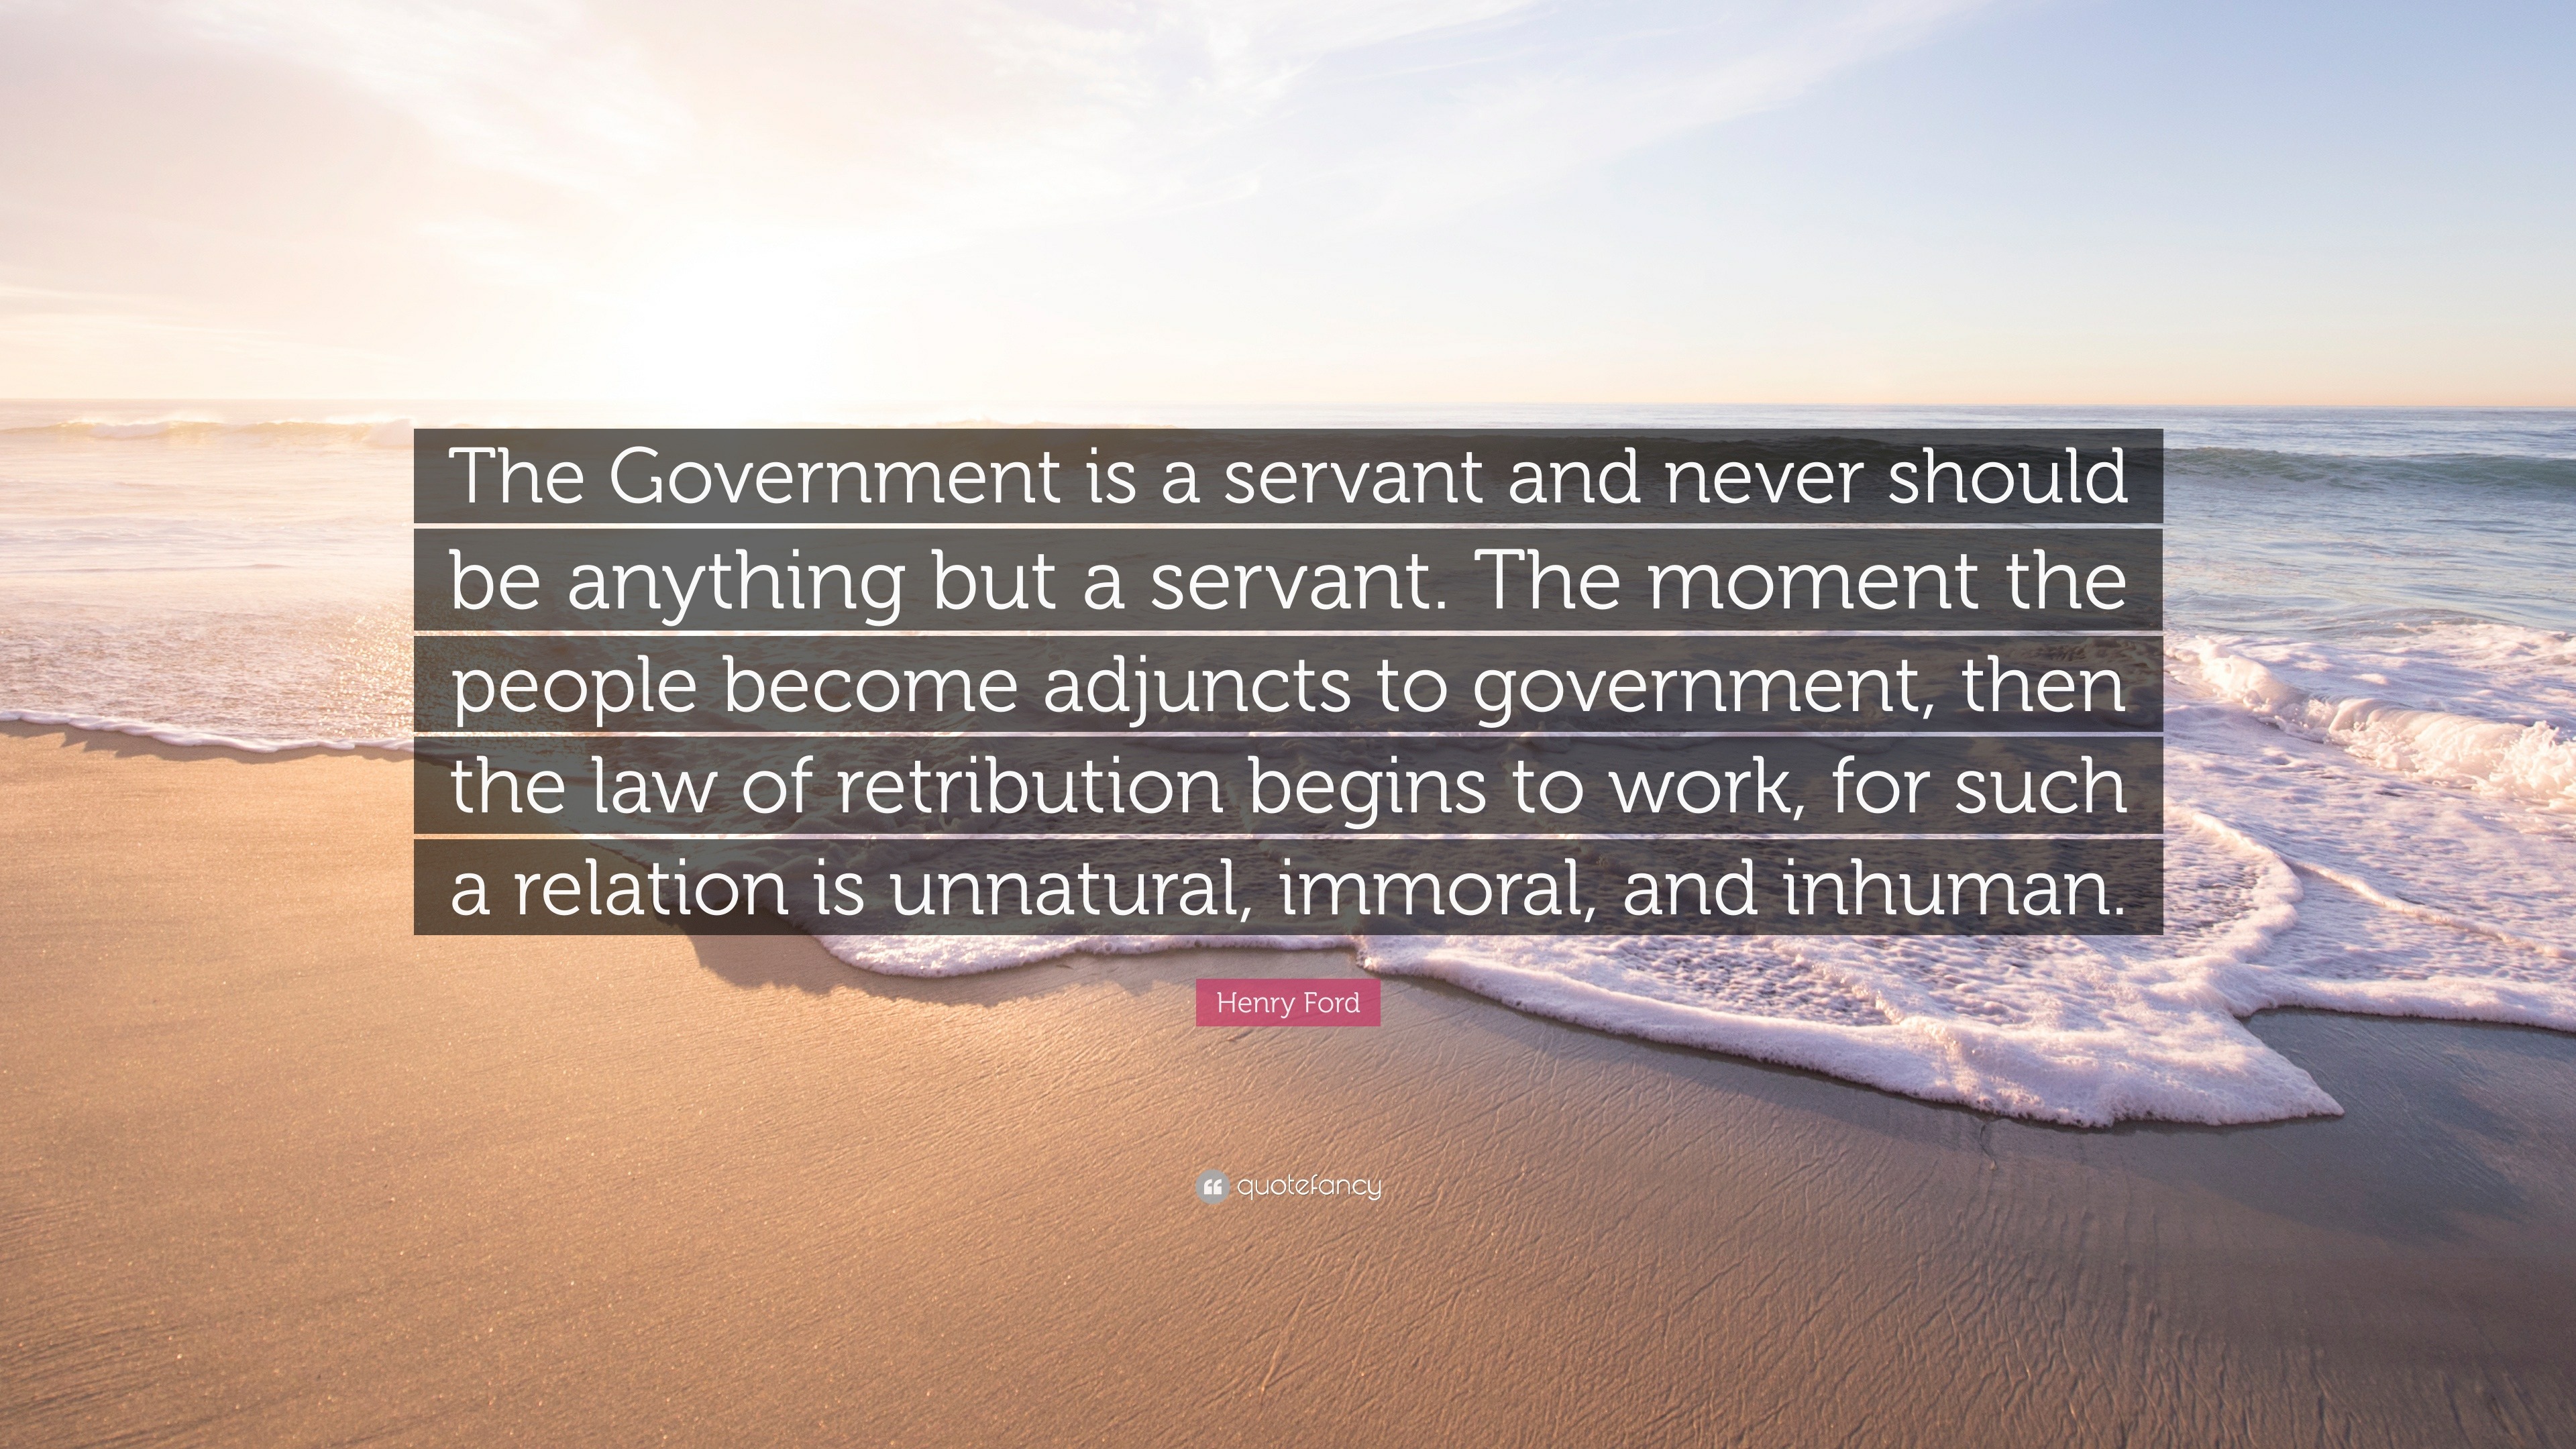 Henry Ford Quote “The Government is a servant and never should be anything but